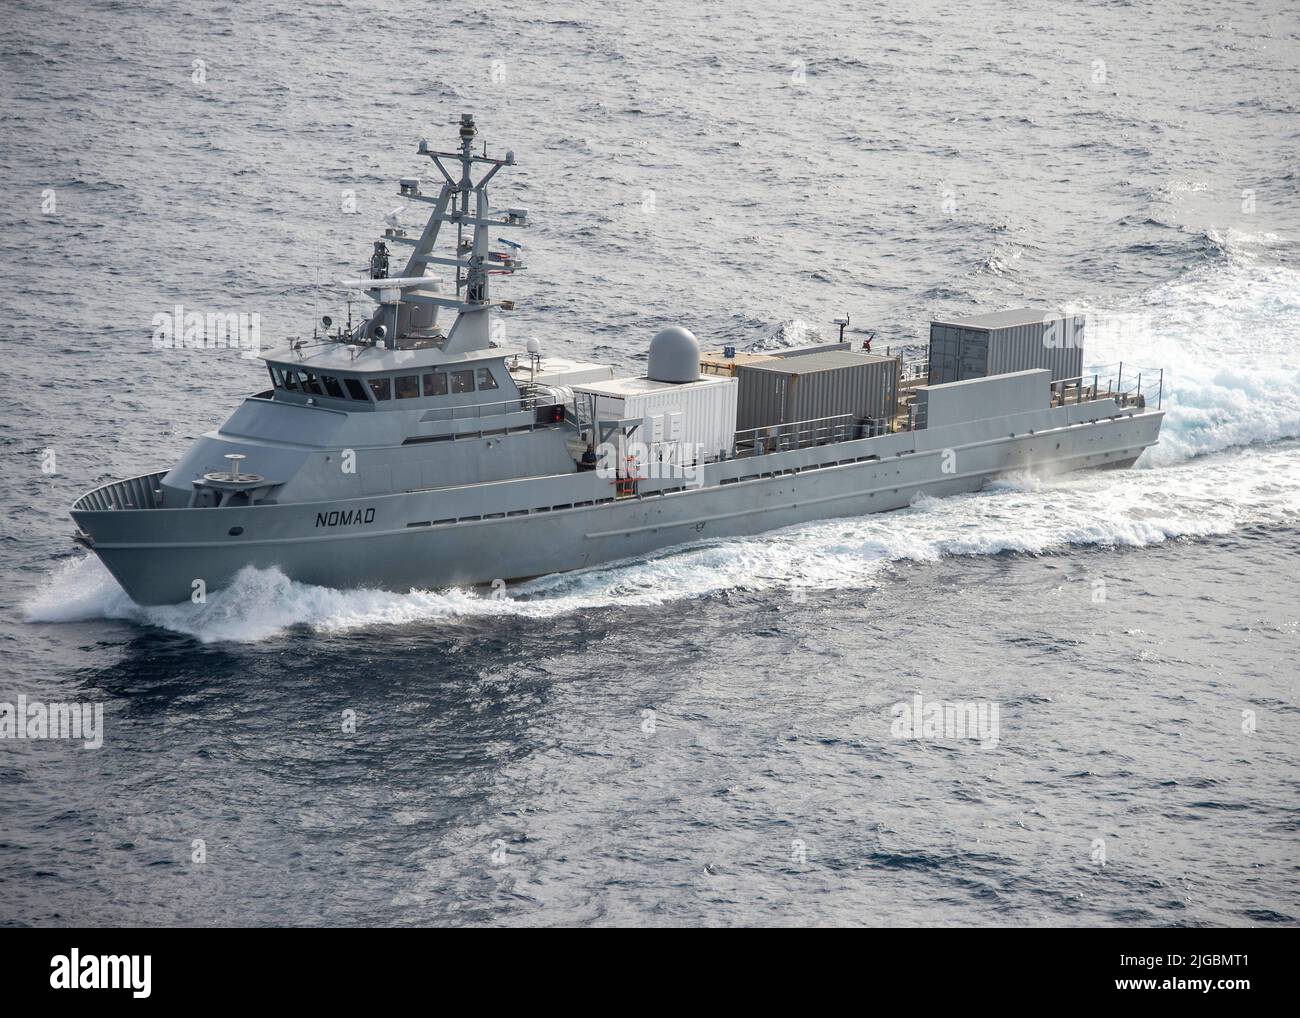 Pacific Ocean, United States. 28 June, 2022. The U.S. Navy large unmanned surface vessel USV Nomad transits the Pacific Ocean on the way to Rim of the Pacific 2022 multi-national exercises, June 28, 2022 in the Pacific Ocean. The Nomad is a completely autonomous unmanned vessel, part of the Navy Overlord program.  Credit: MC1 Tyler Fraser/Planetpix/Alamy Live News Stock Photo